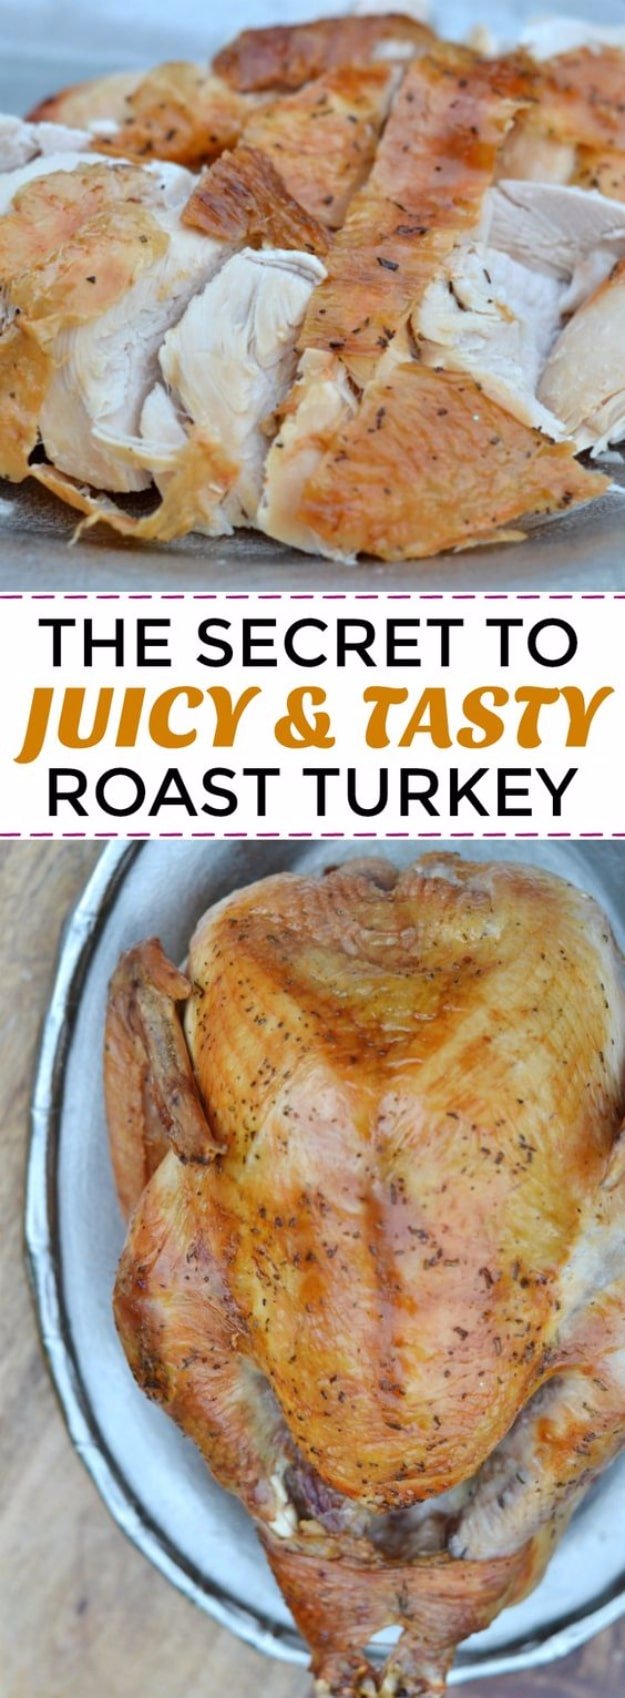 Best Thanksgiving Dinner Recipes - Dry Brine Roast Turkey - Easy DIY Desserts, Sides, Sauces, Main Courses, Vegetables, Pie and Side Dishes. Simple Gravy, Cranberries, Turkey and Pies With Step by Step Tutorials